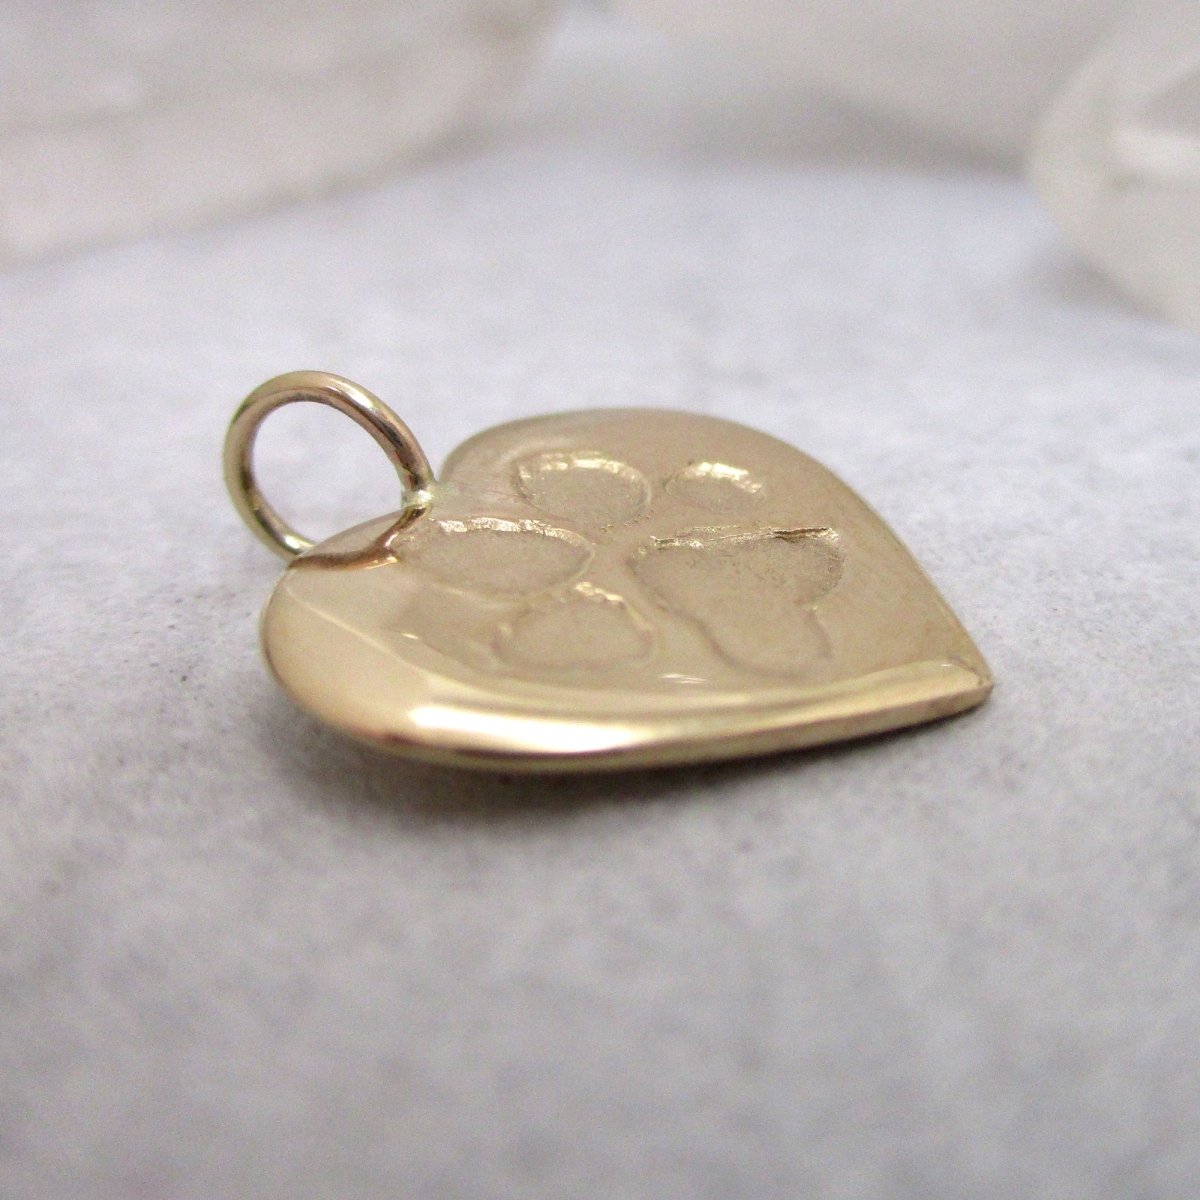 Your Dog's or Cat's Paw Print Heart in Solid 14 Karat Gold. Email us your print! - Luxe Design Jewellery